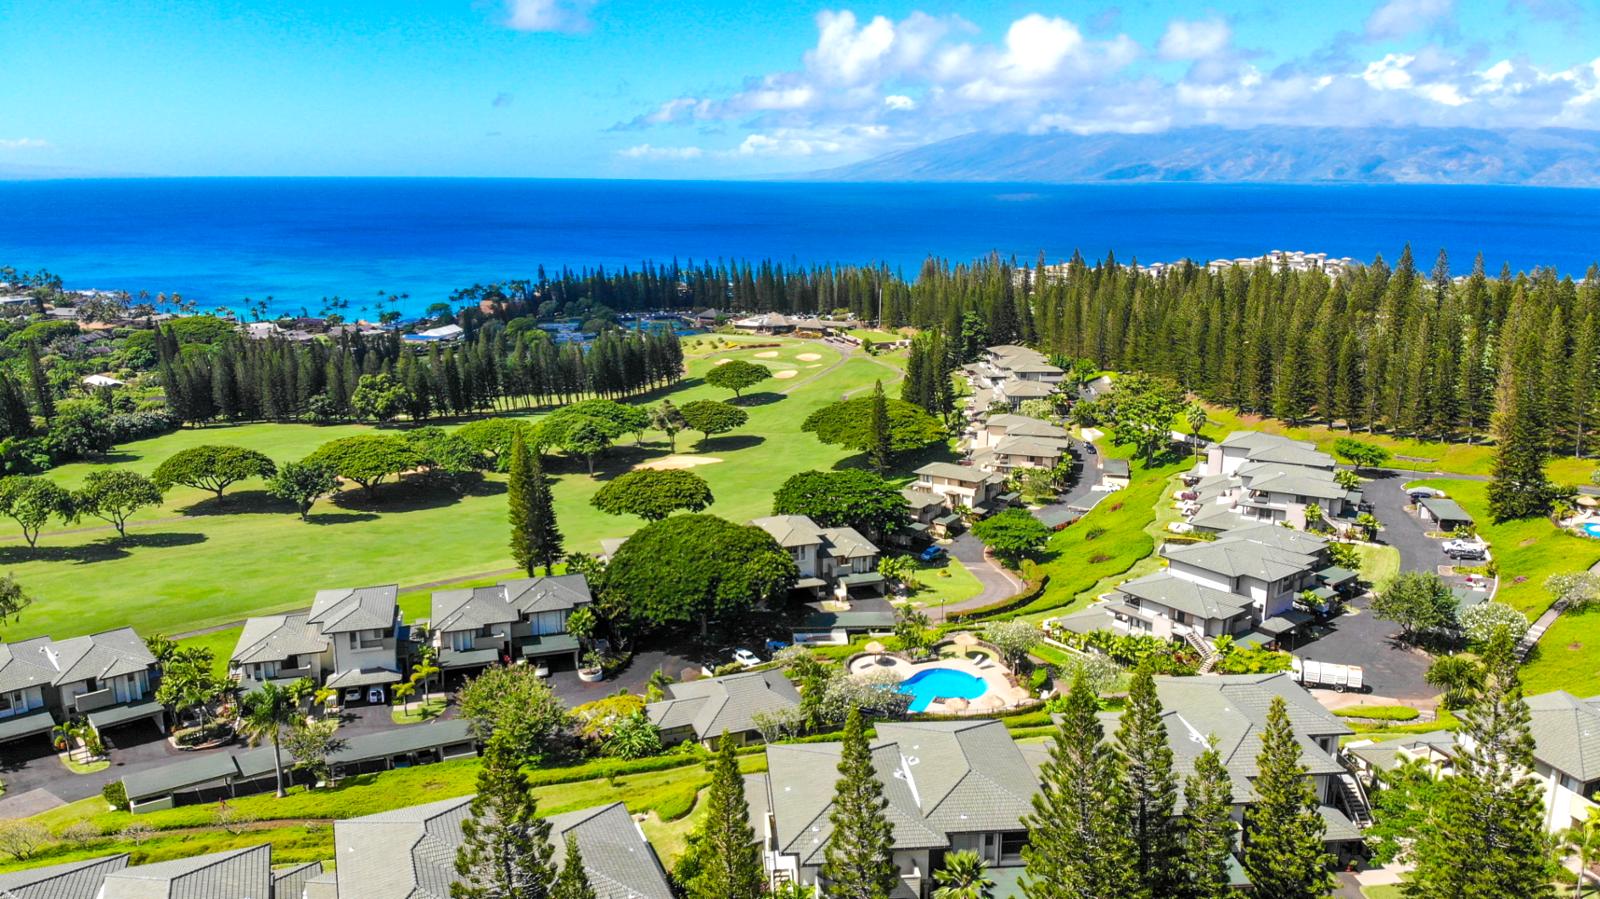 Welcome to the world famous Kapalua Resort Golf Villas! Aerial view